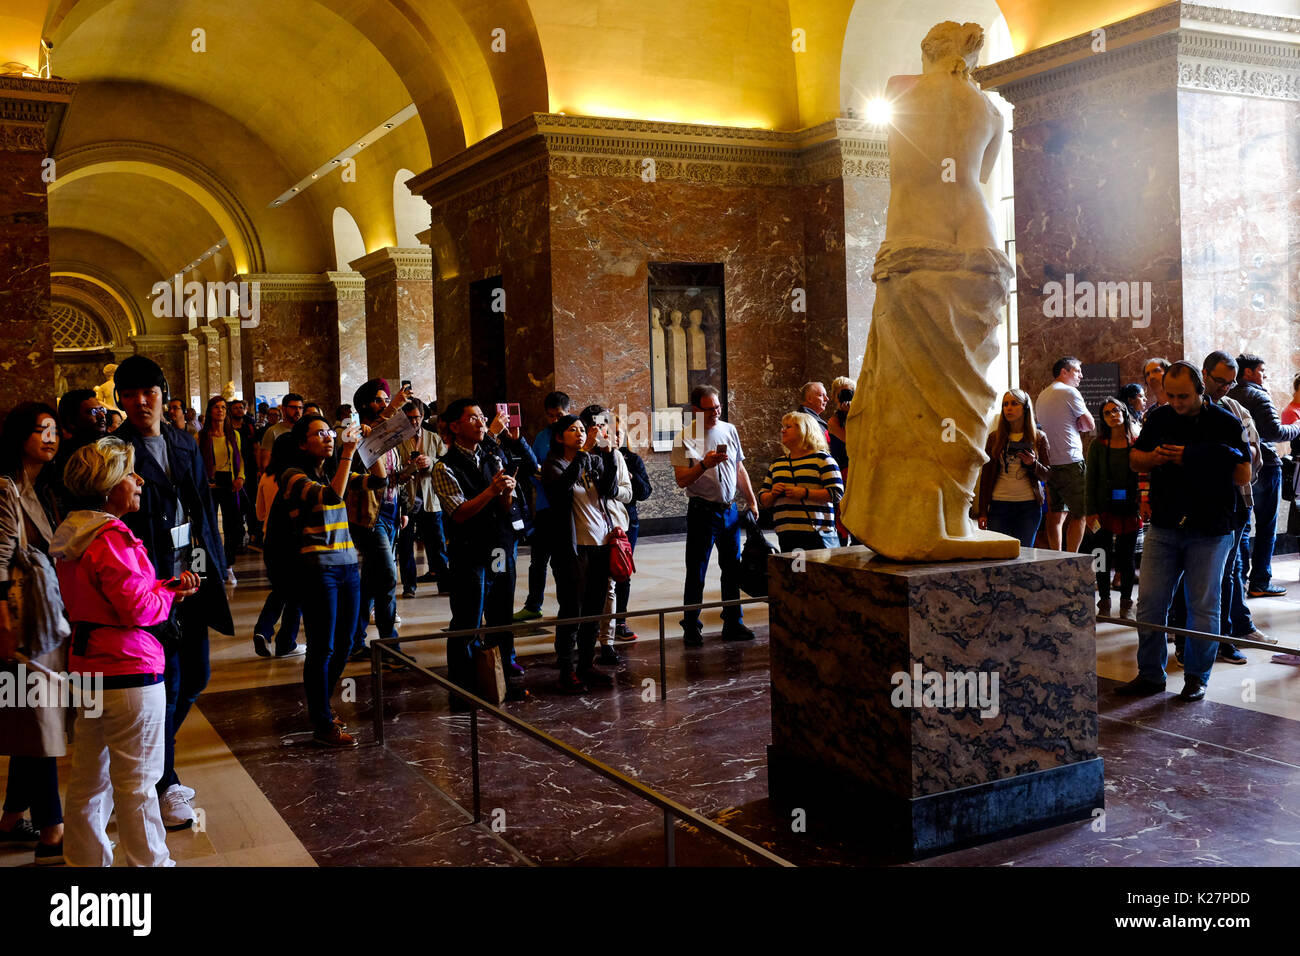 People pose and take selfies with Venus De Milo at the Louvre museum in Paris, France on September 17, 2016. Stock Photo